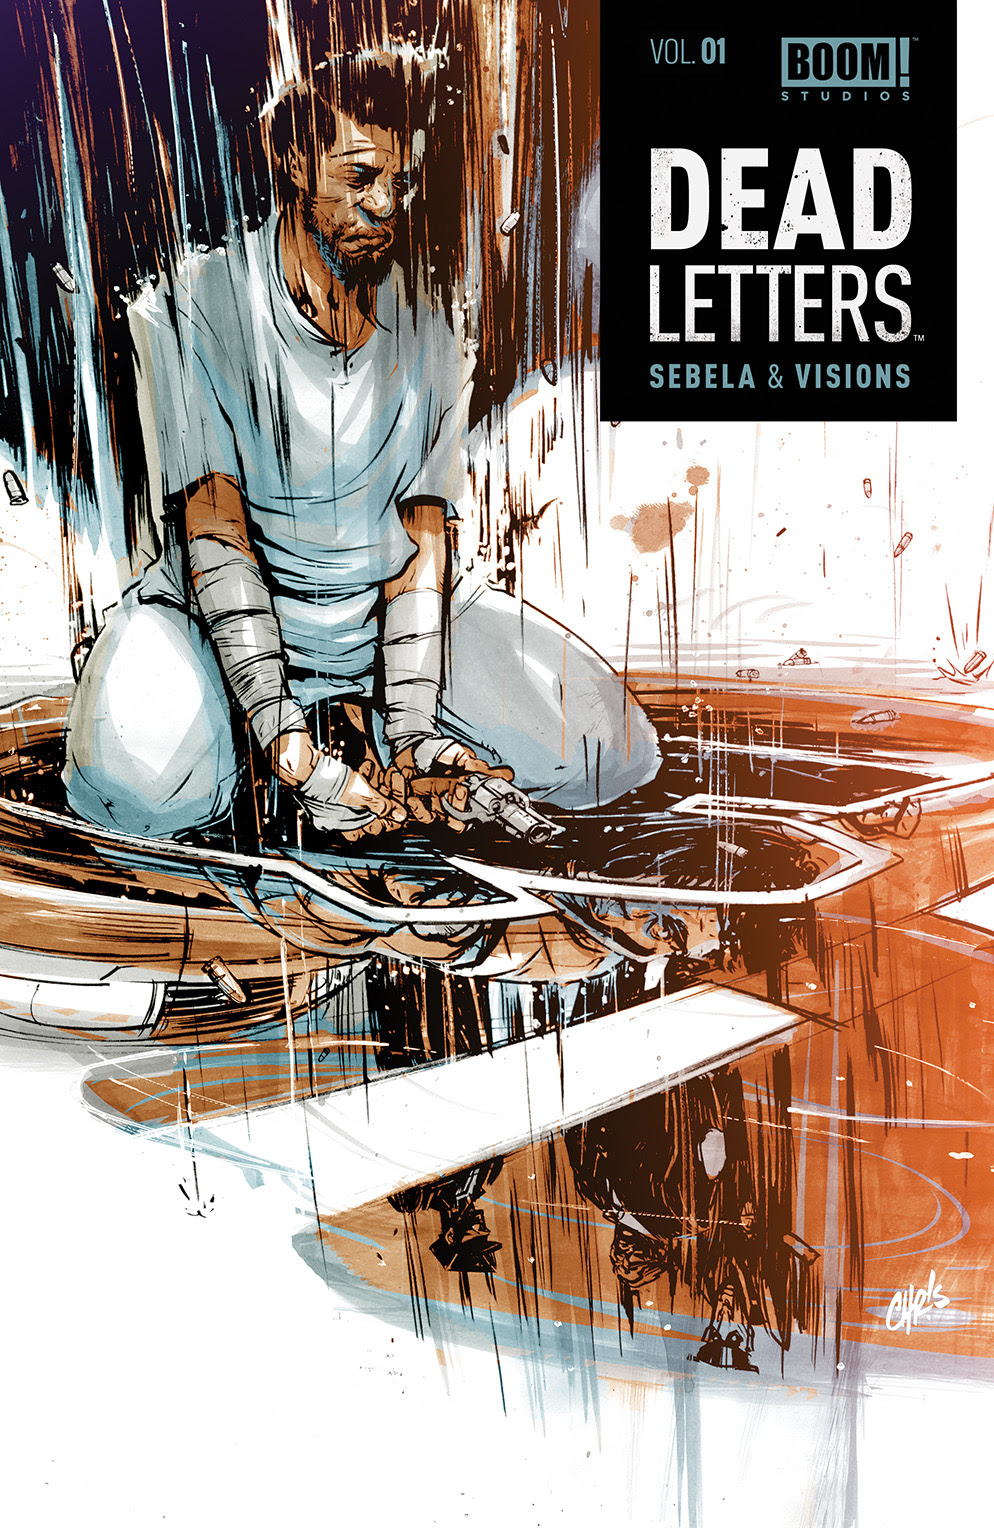 DEAD LETTERS VOL. 1 TP Cover by Chris Visions